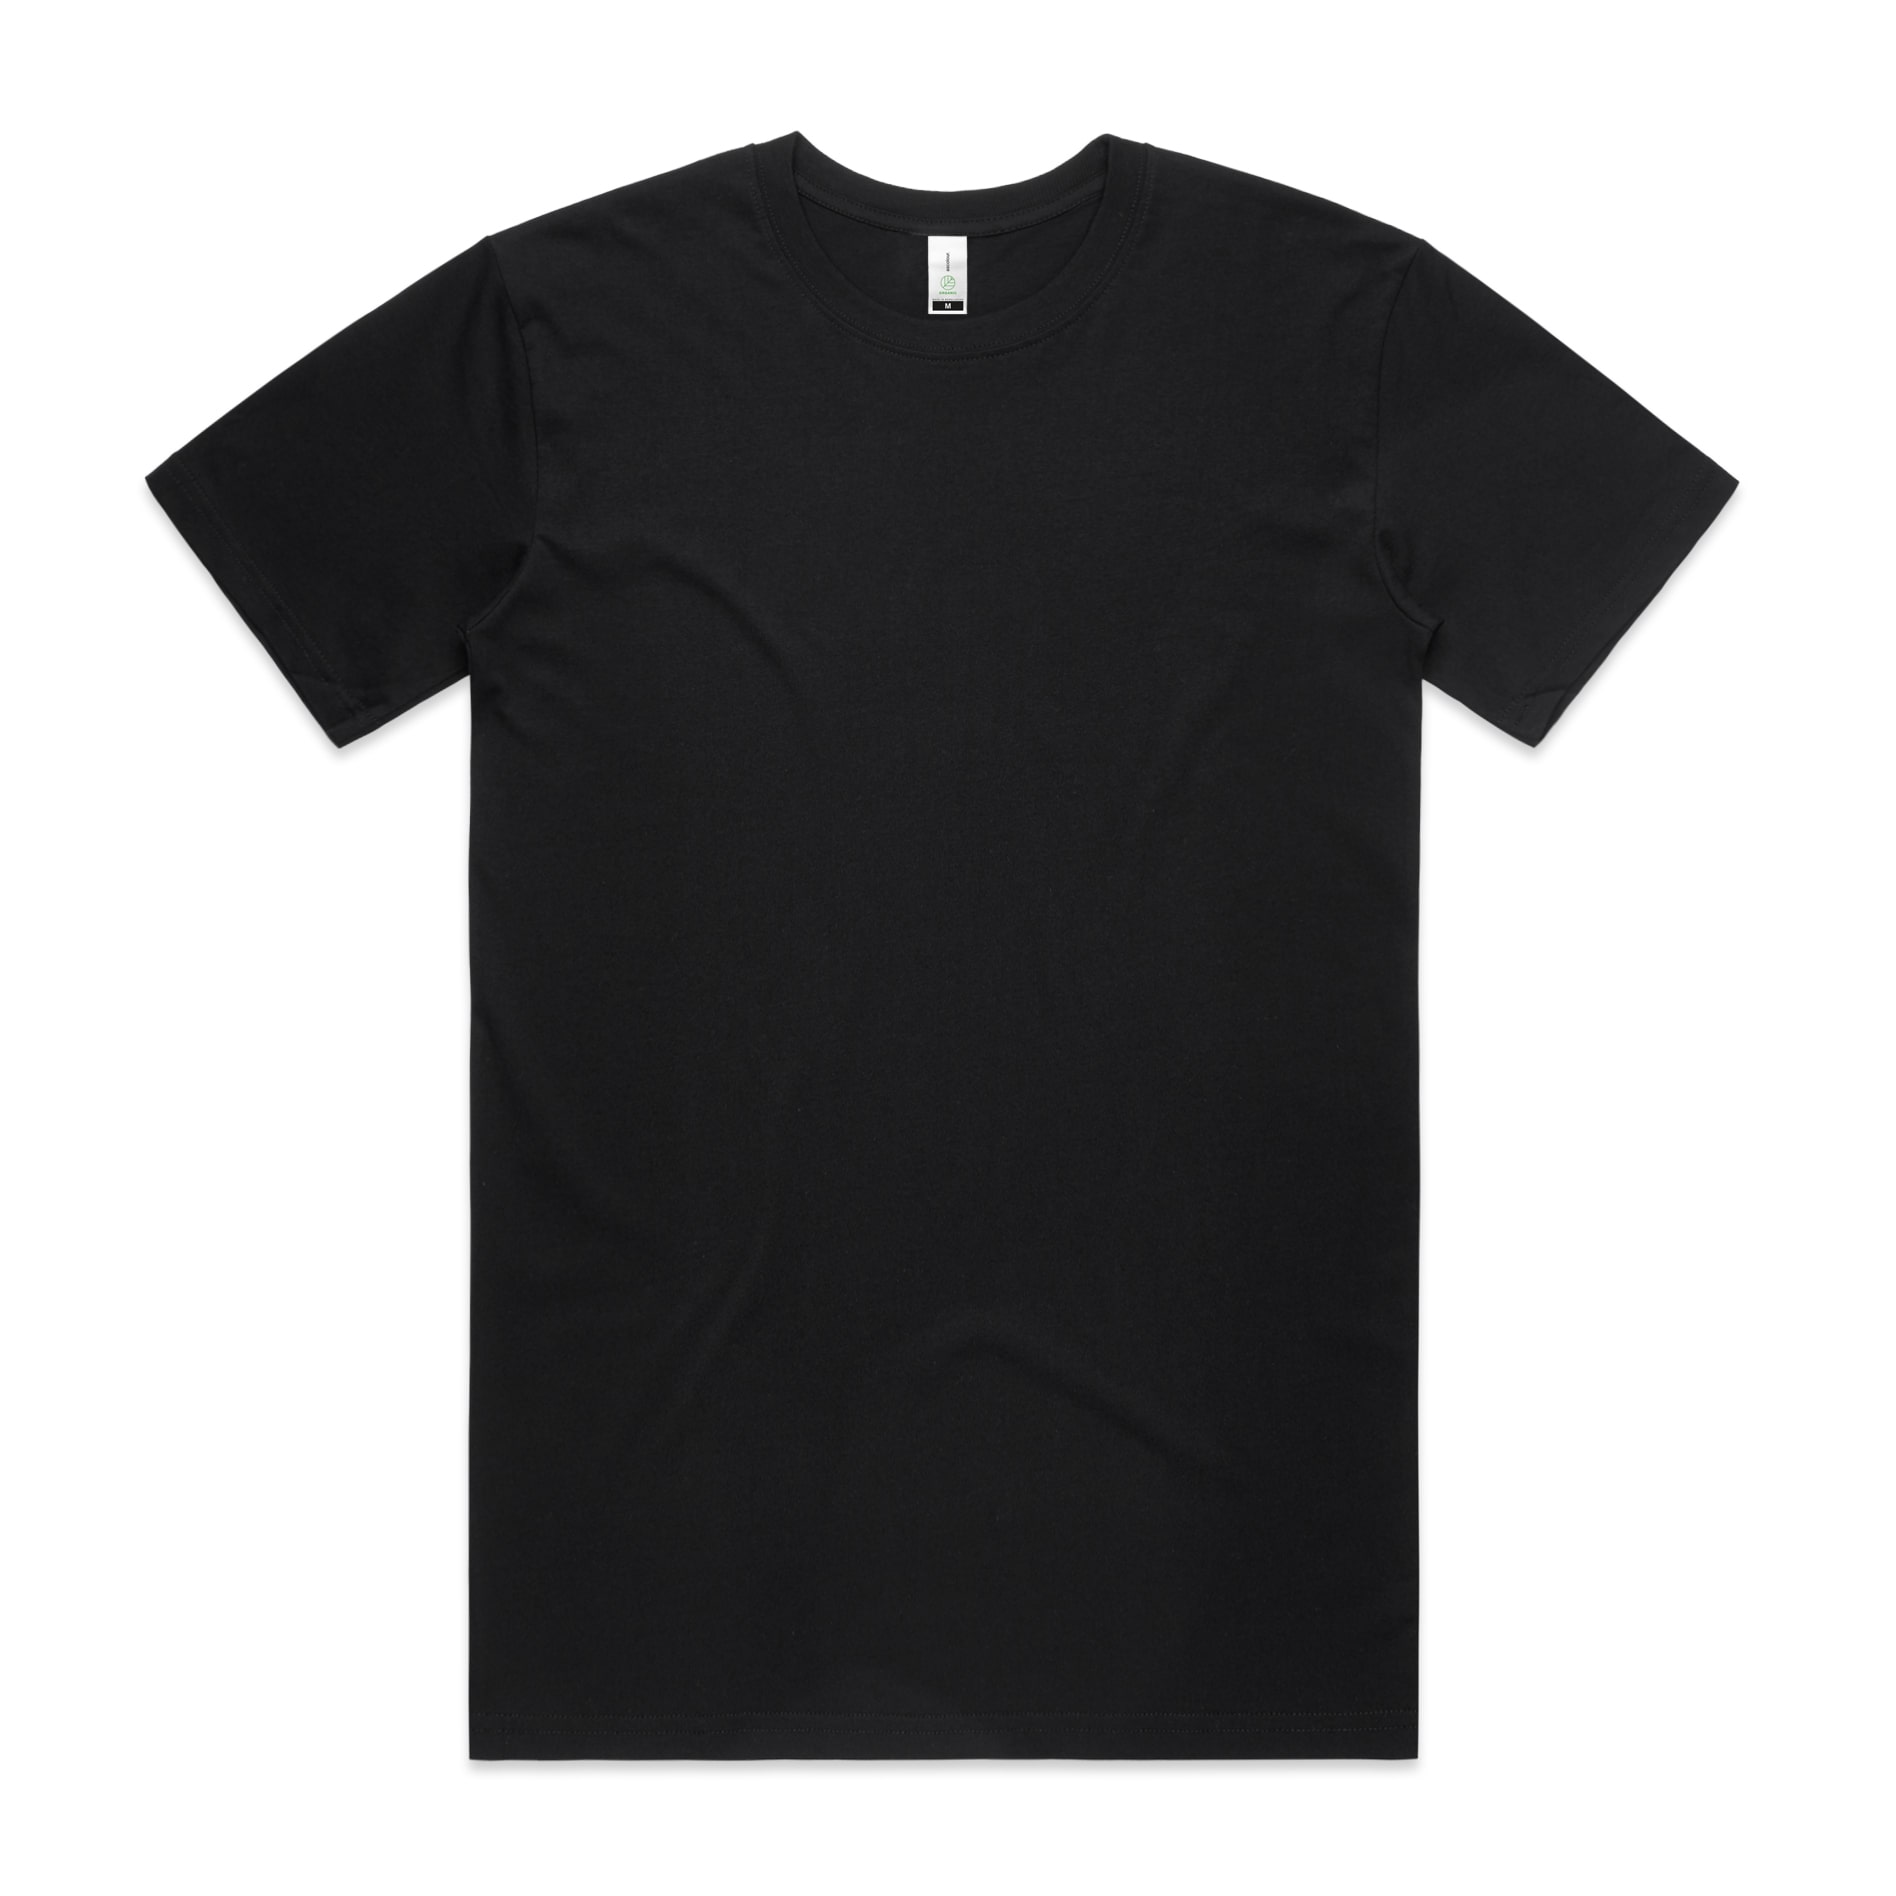 Personalised rugby shirts - 5001g staple organic tee black